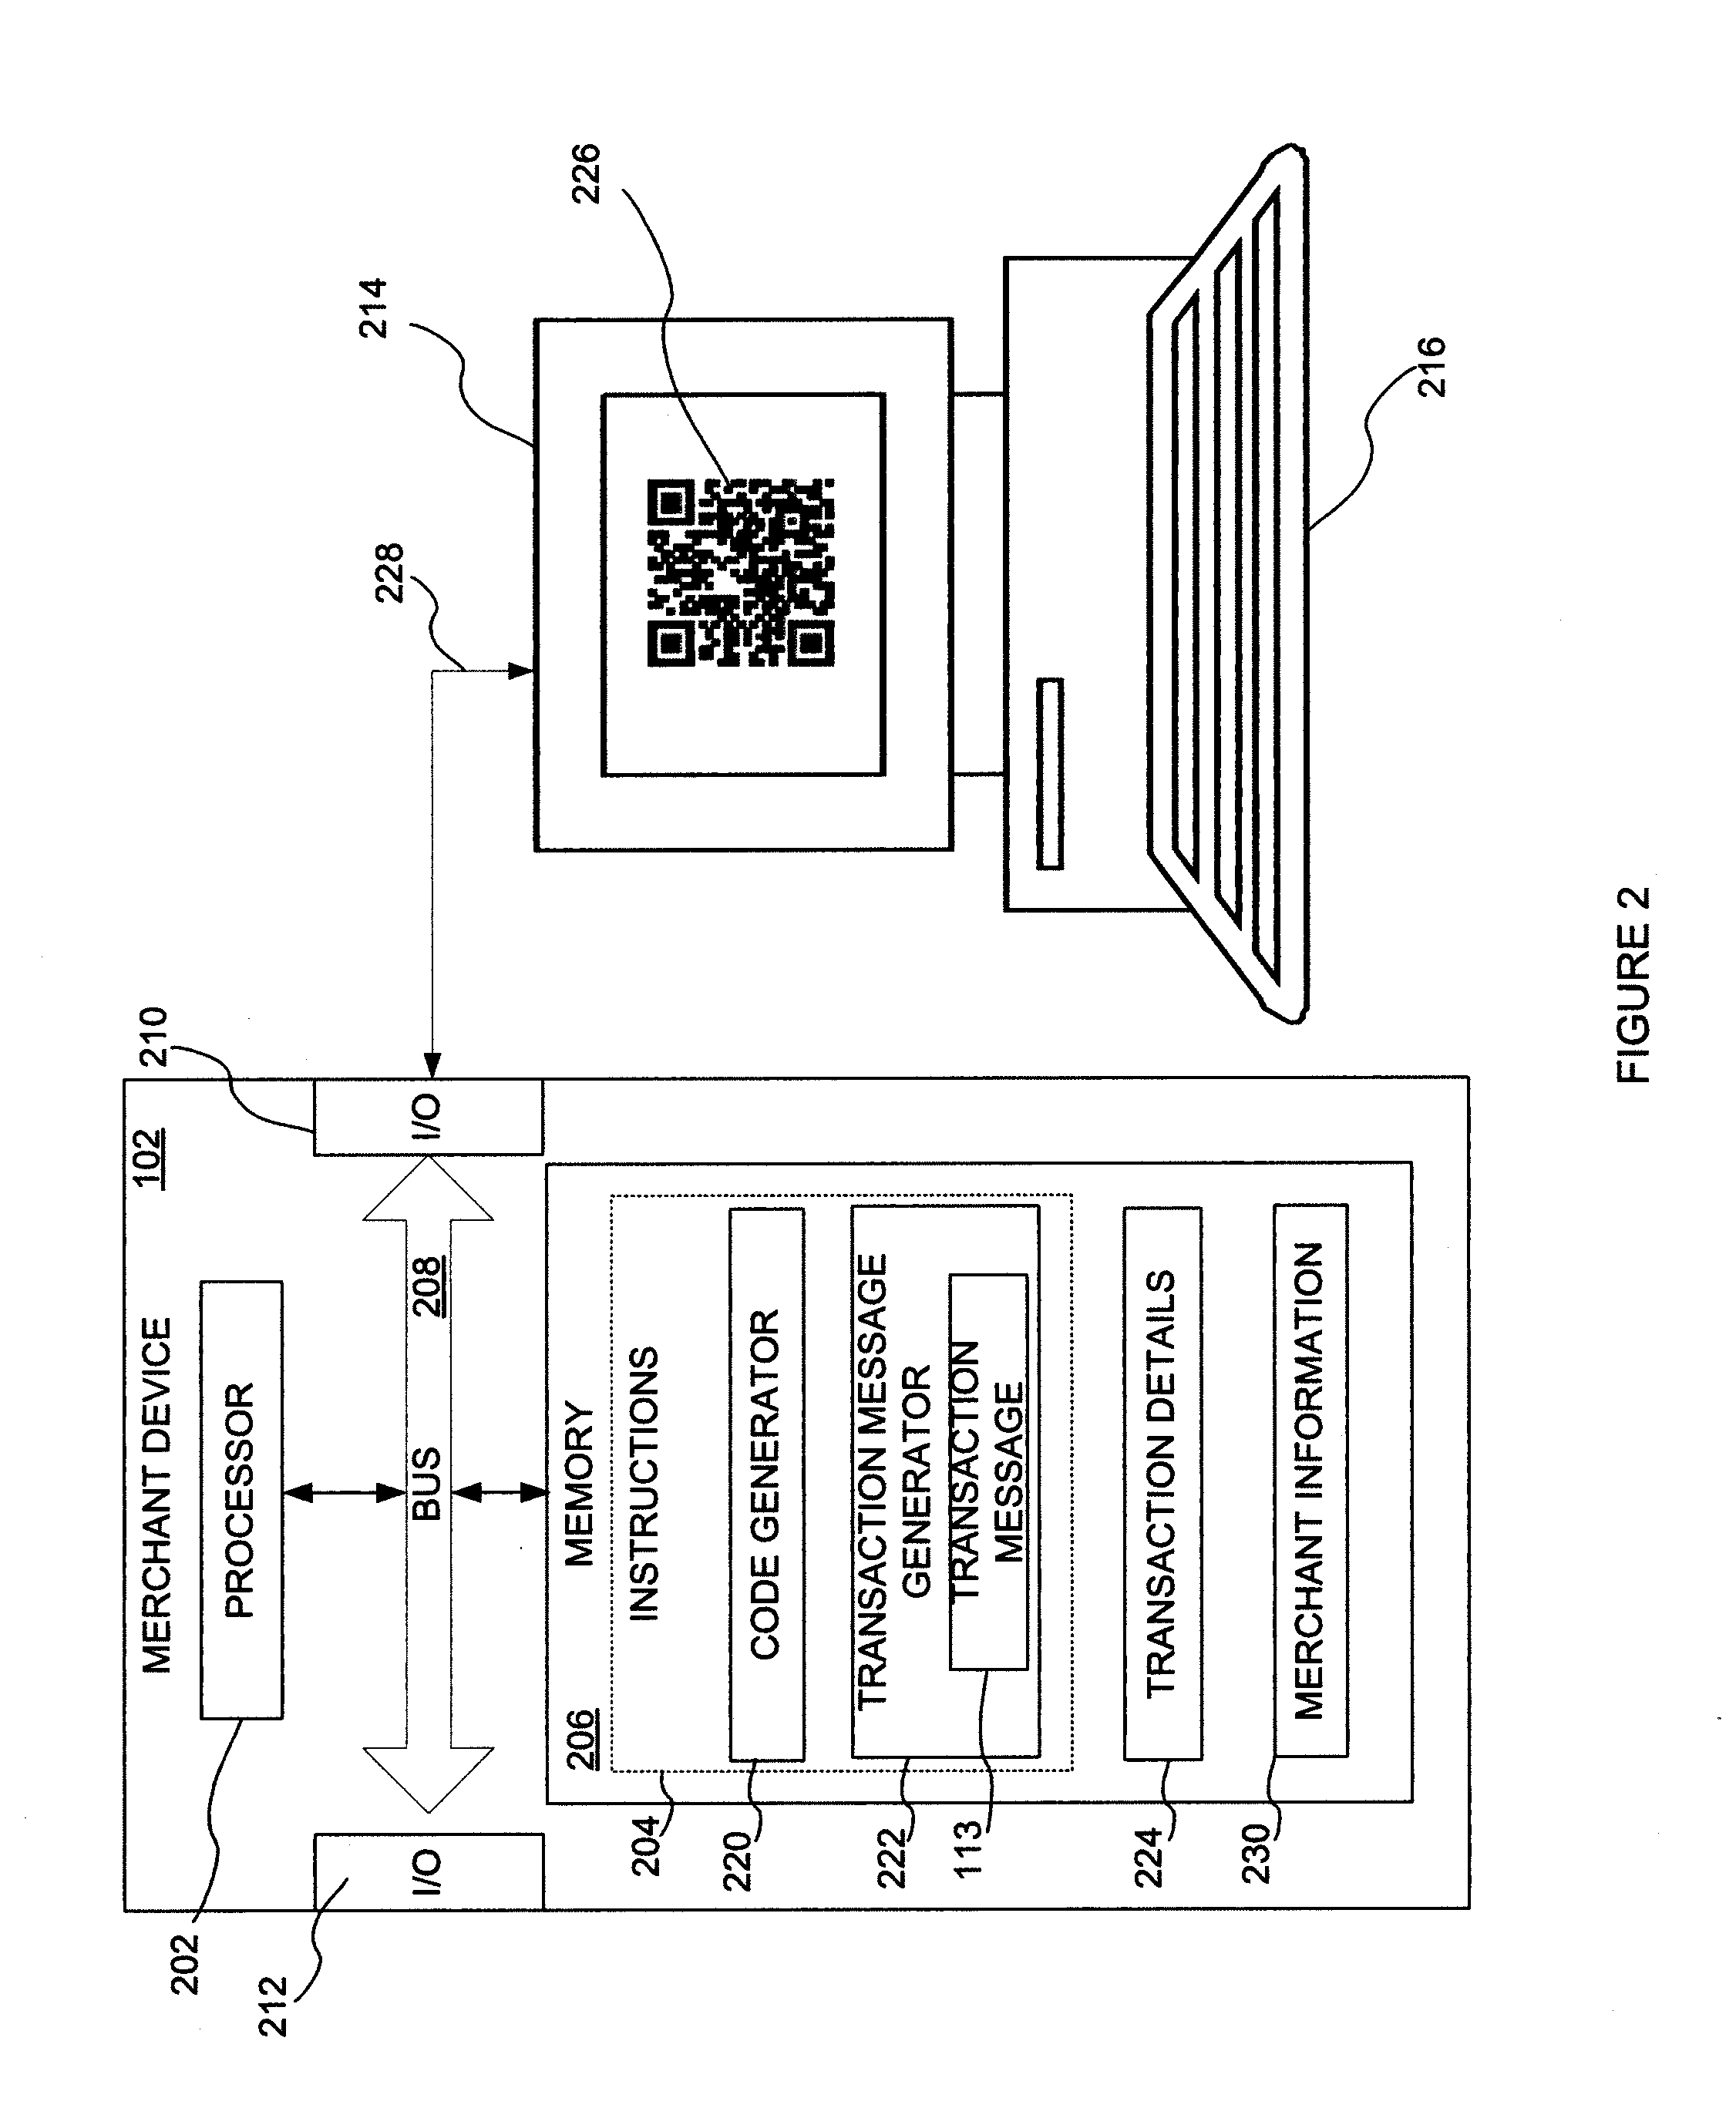 System and method for mobile transaction payments